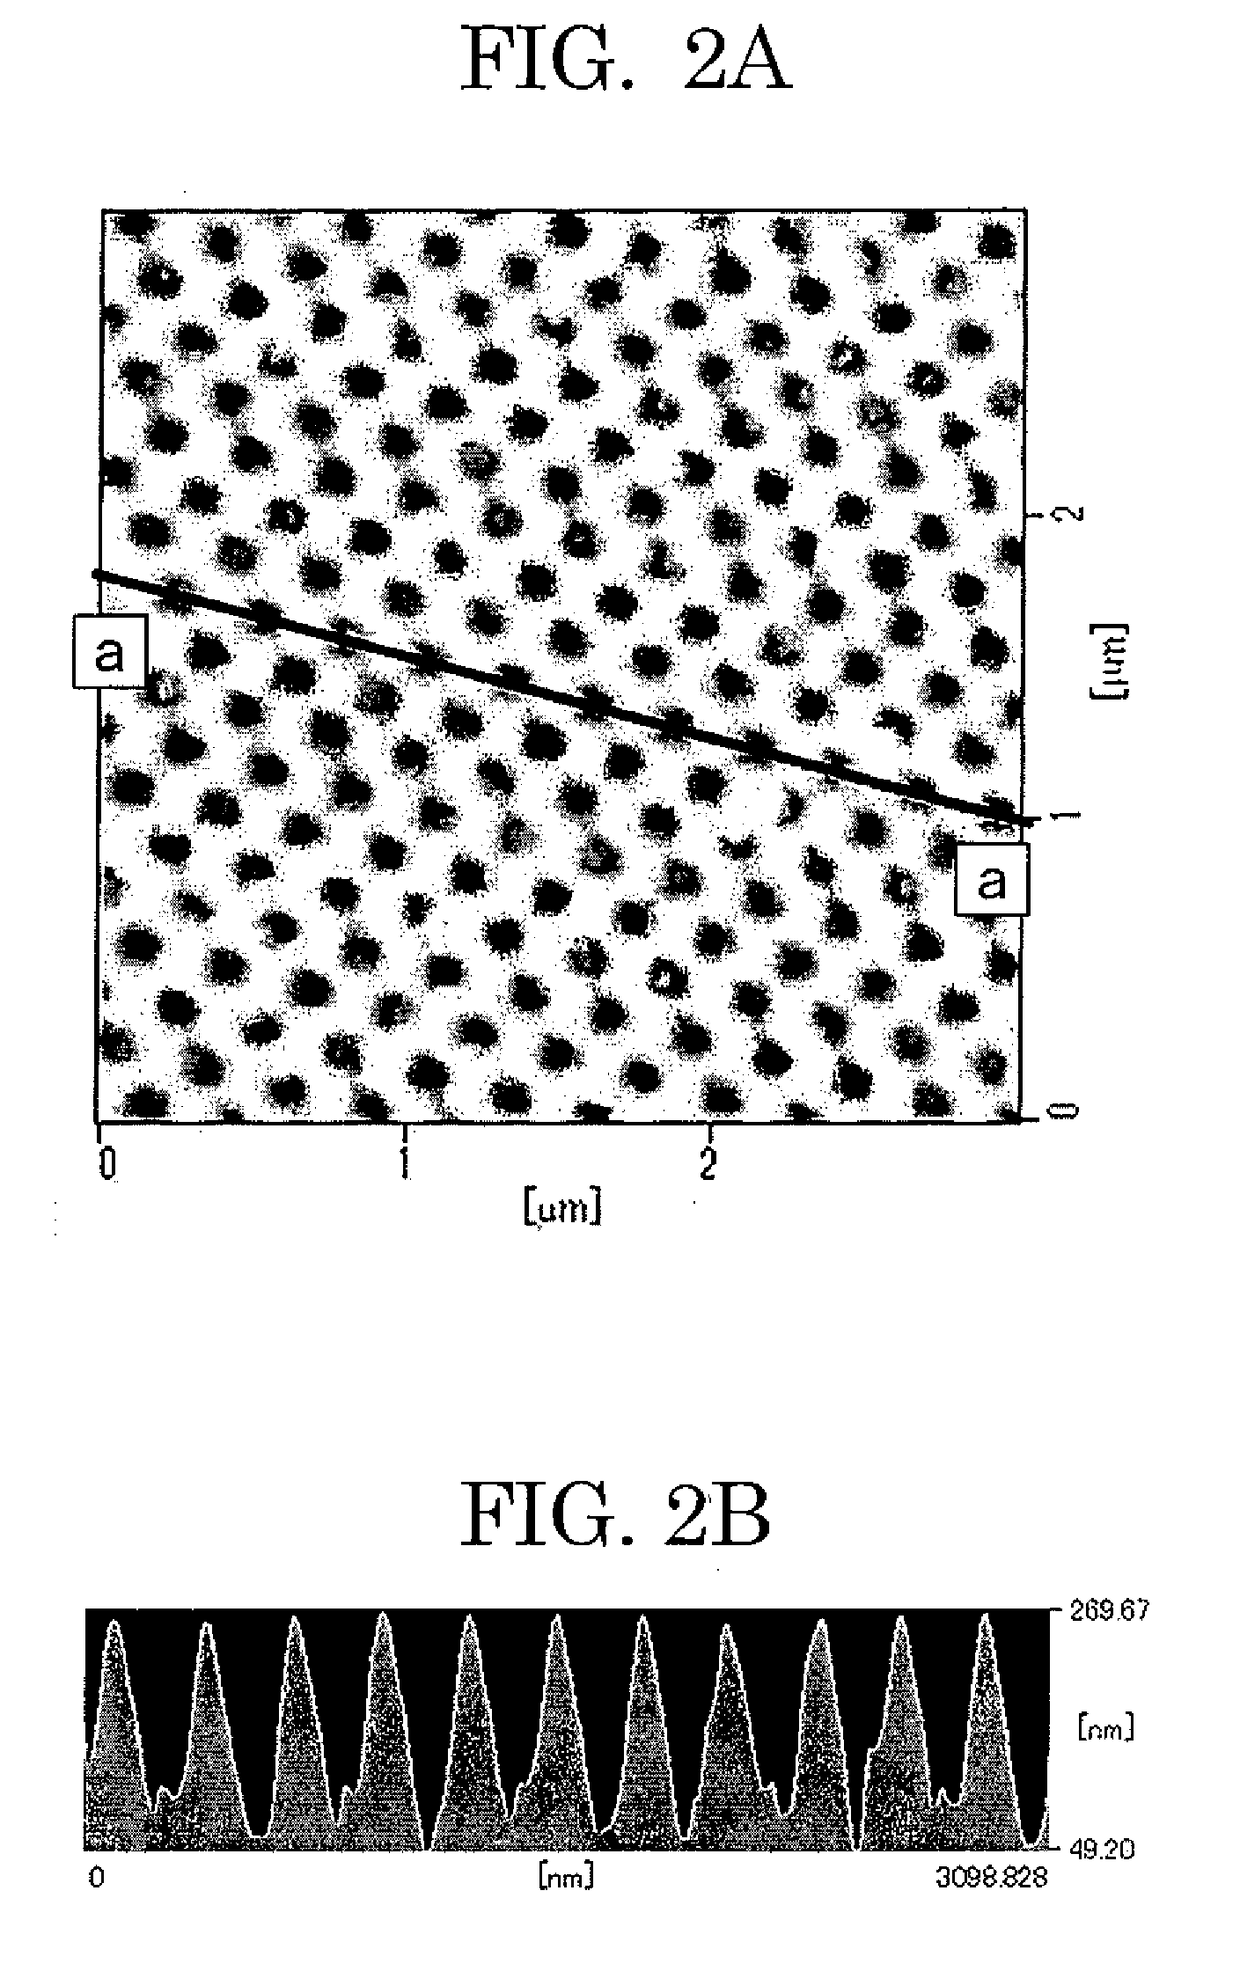 Anti-Fogging and Anti-Fouling Laminate and Method for Producing Same, Article and Method for Producing Same, and Anti-Fouling Method